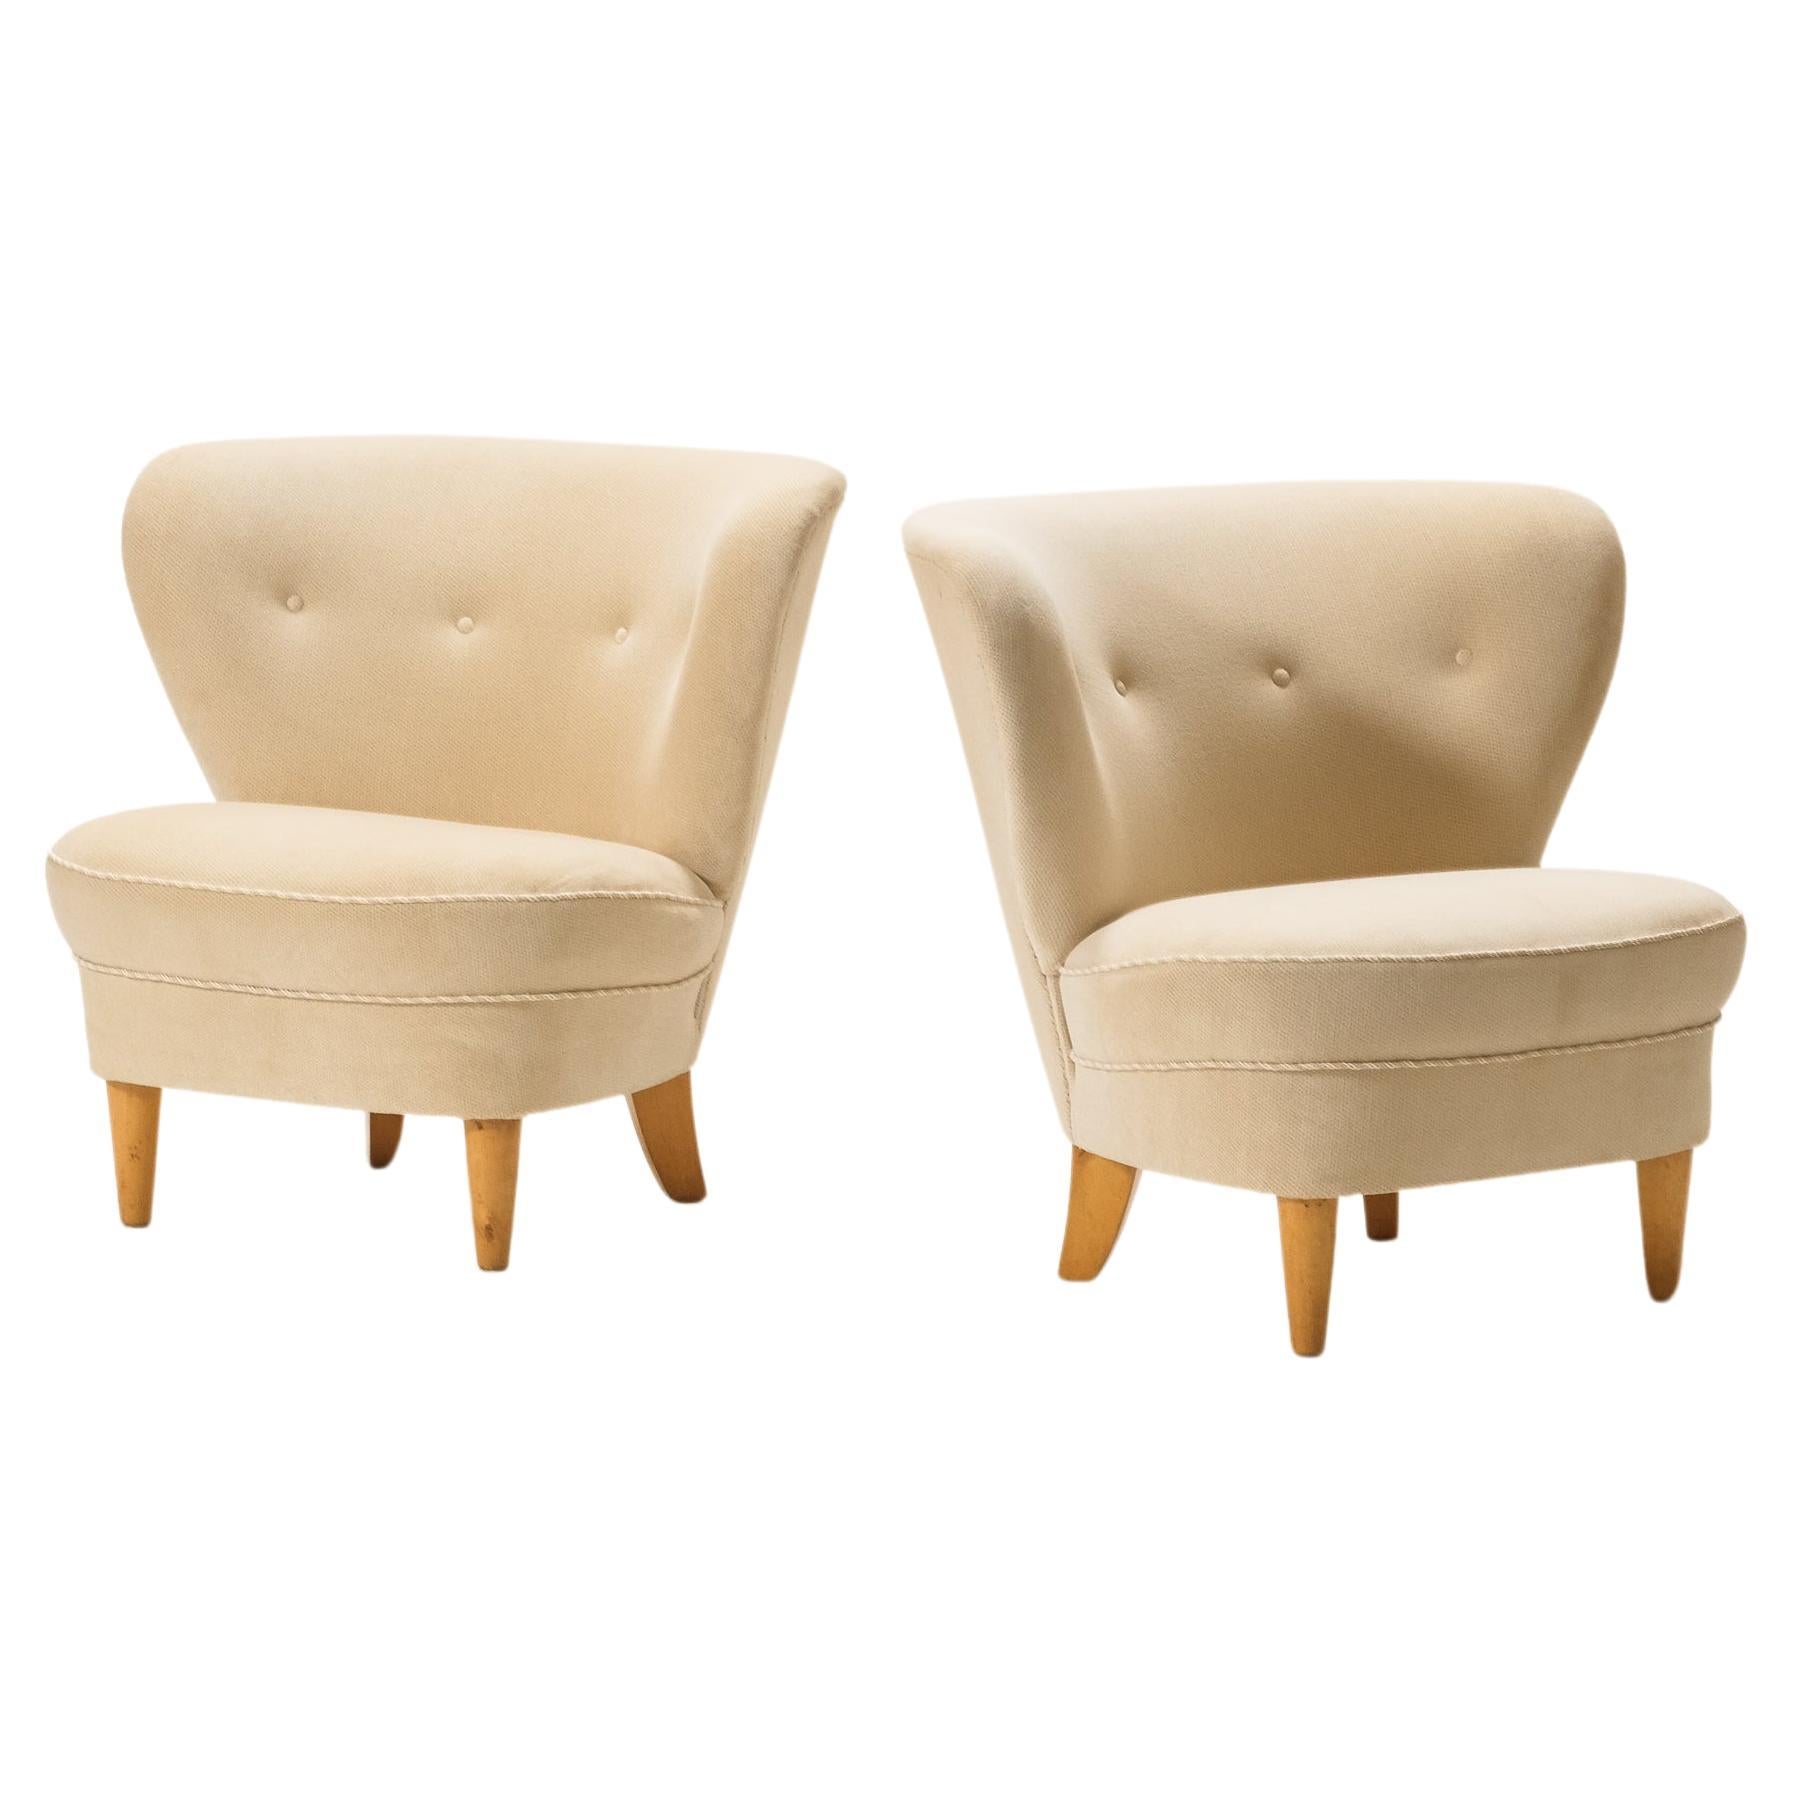 Pair of Mid-Century Easy Chairs, Finland, 1950s